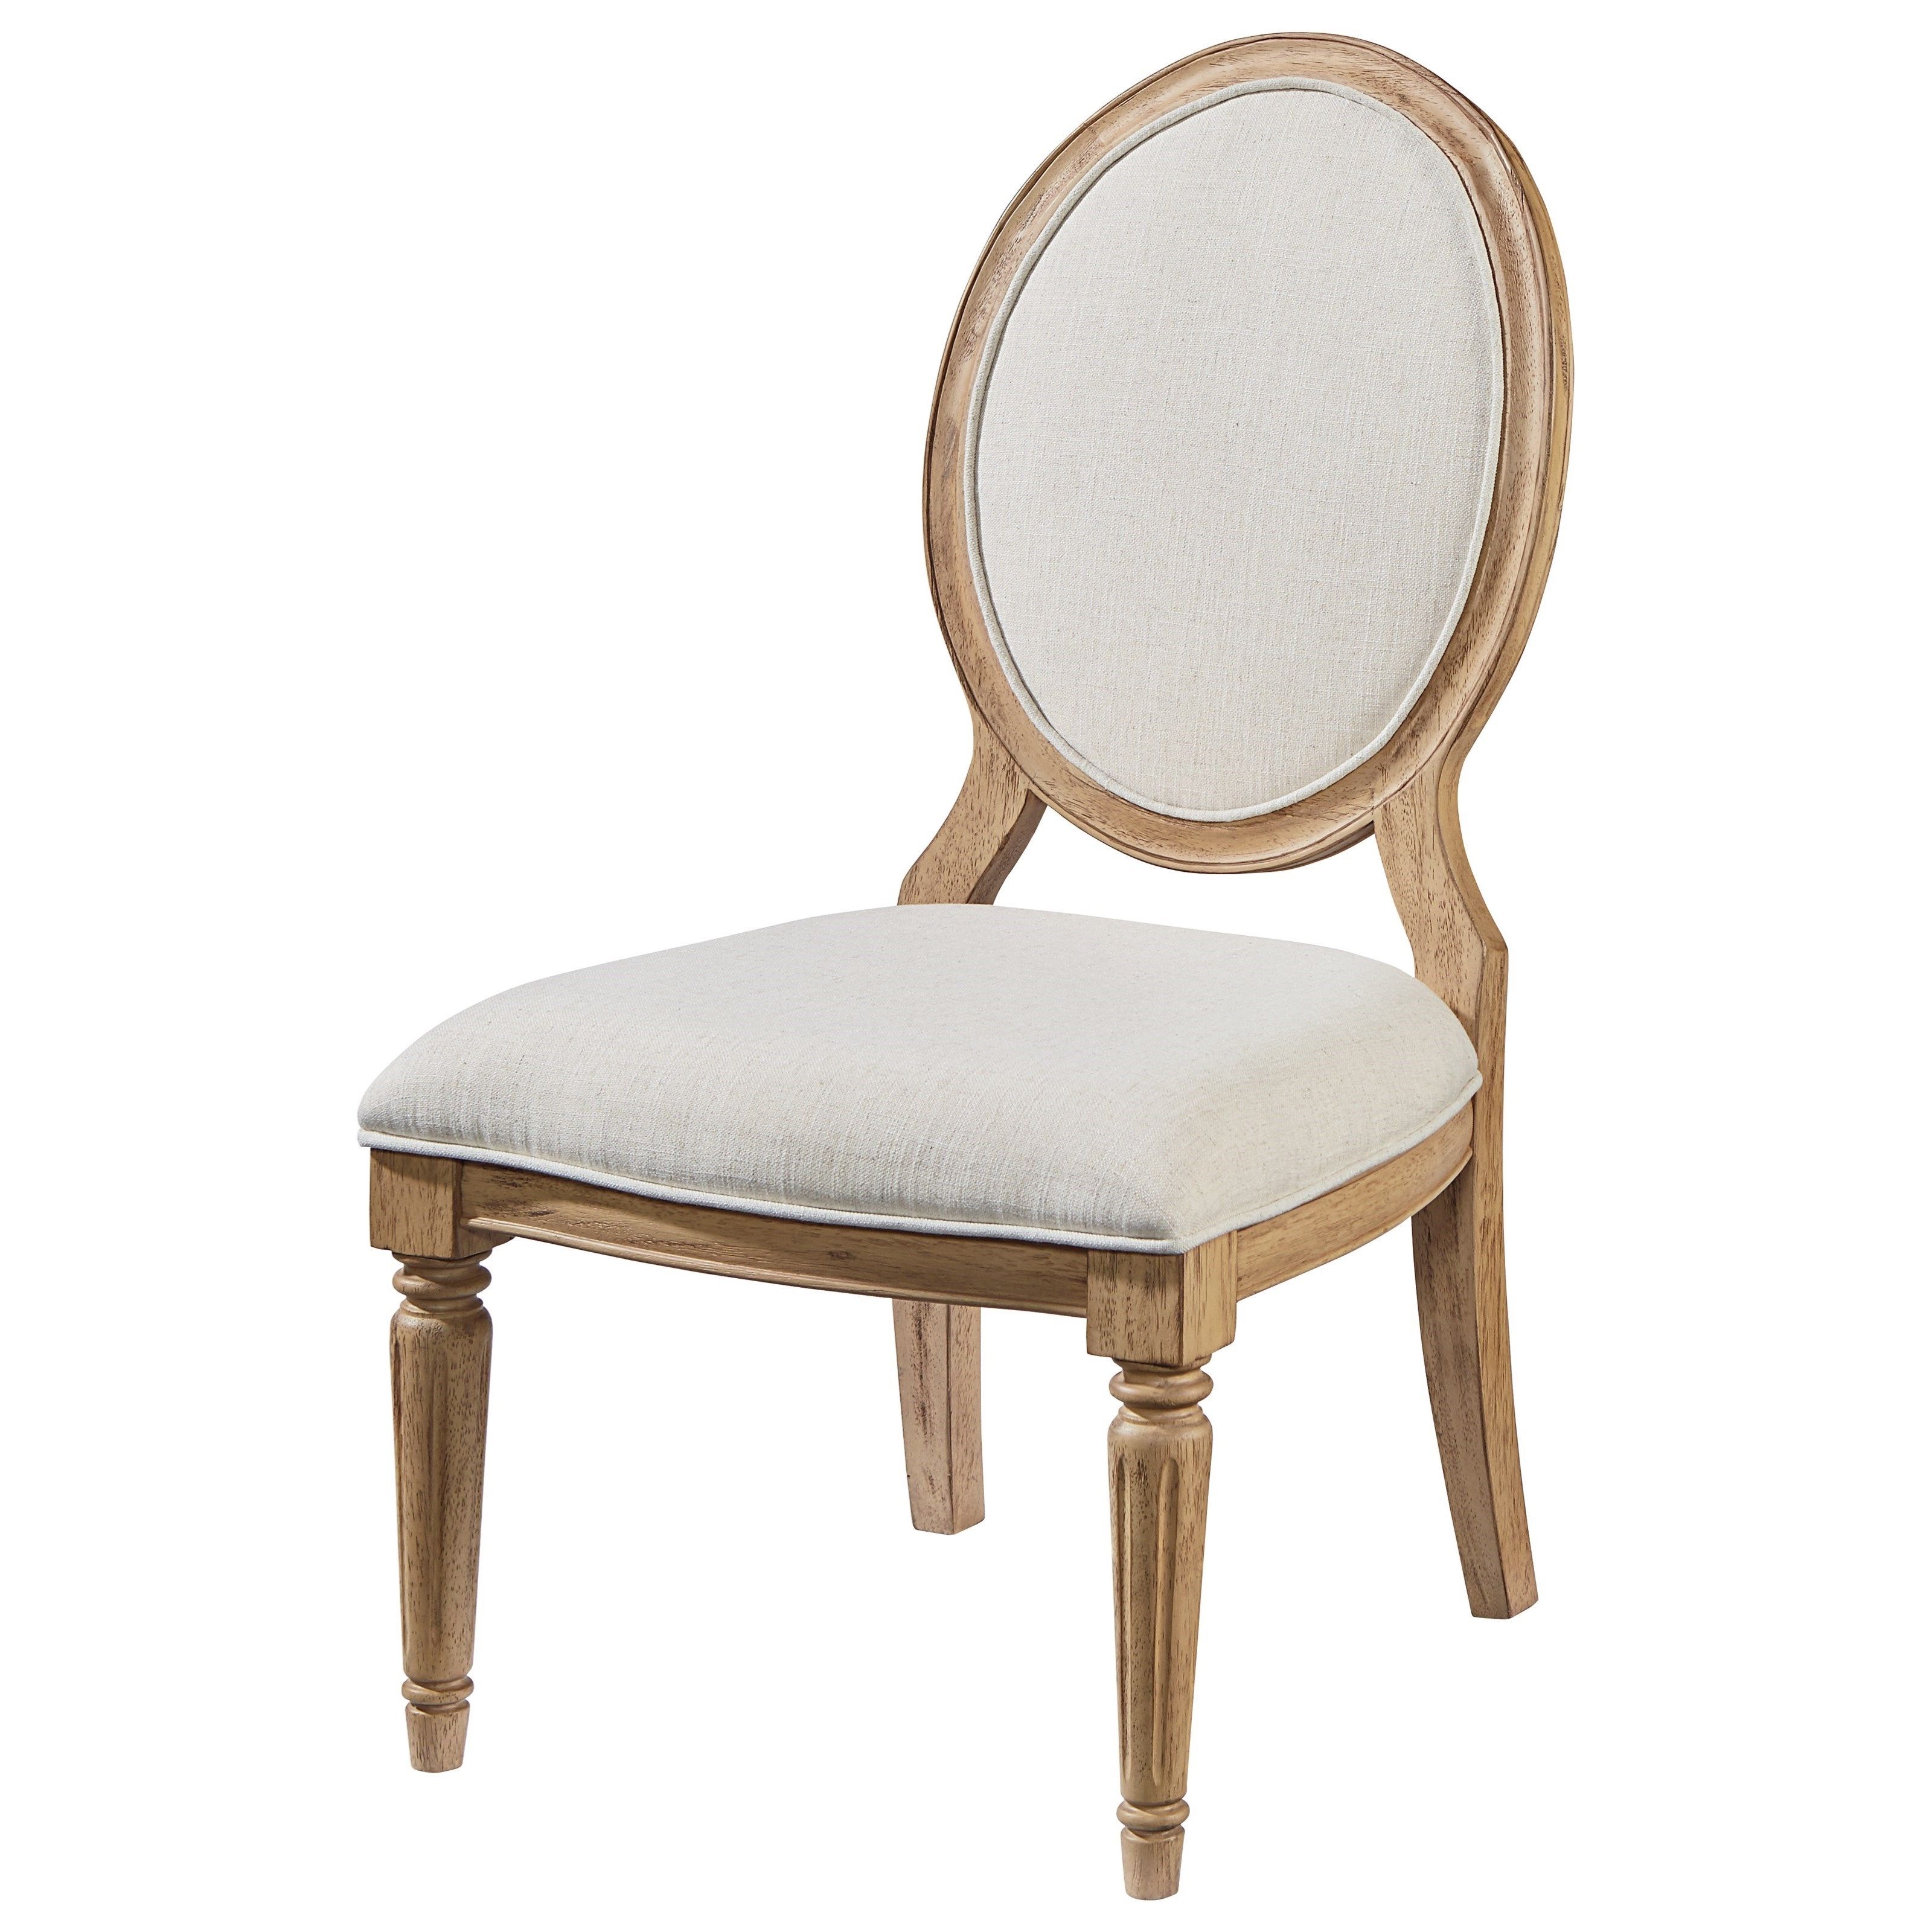 Magnolia Homejoanna Gaines French Inspired Oval Back Side Chair Within Well Known Magnolia Home Spindle Back Side Chairs (View 12 of 20)